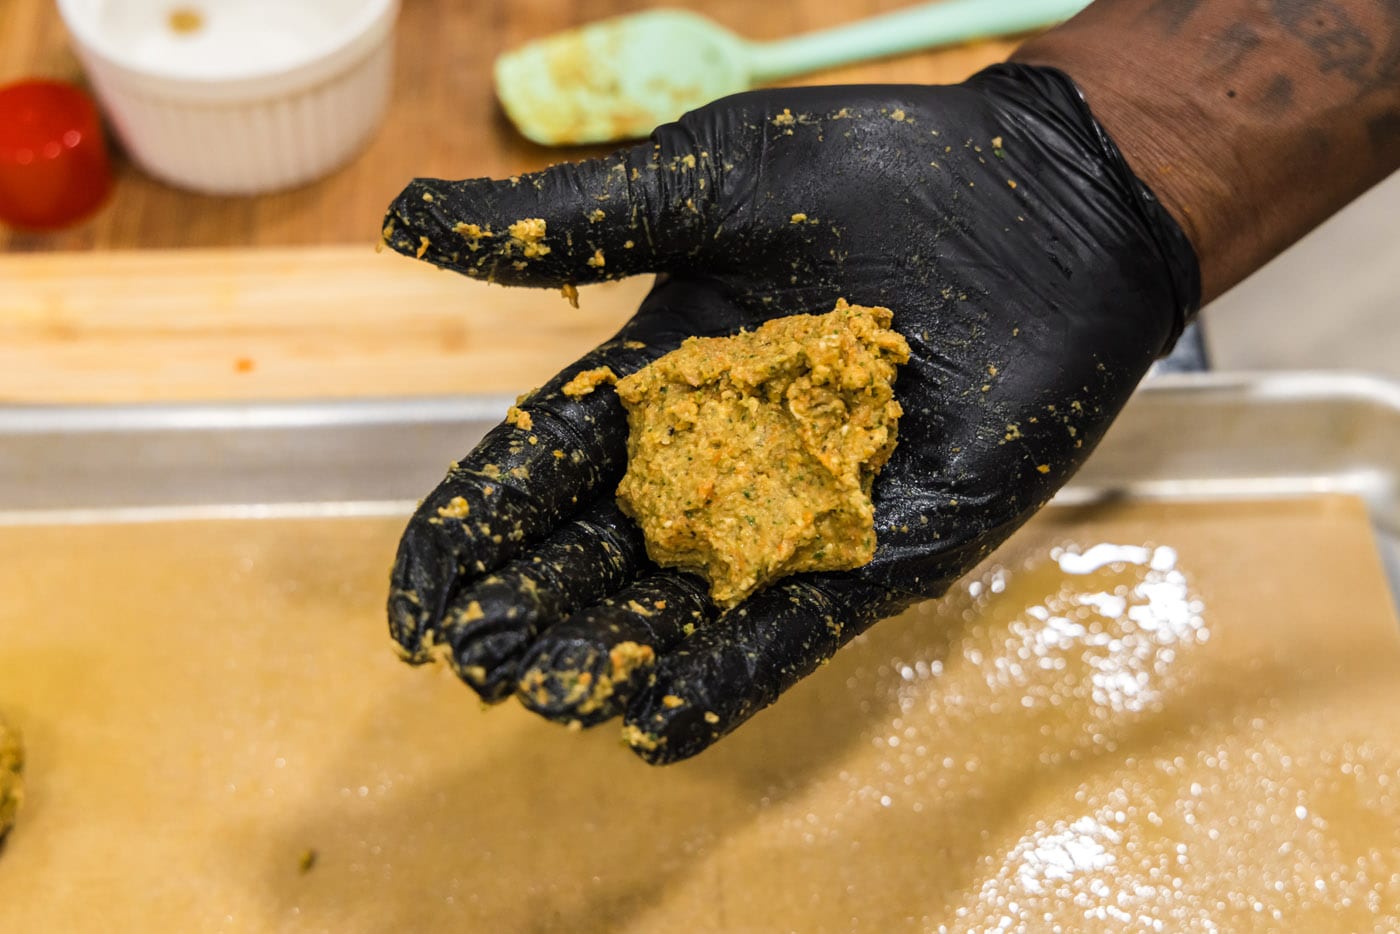 lentil meatball mixture in palm of hand